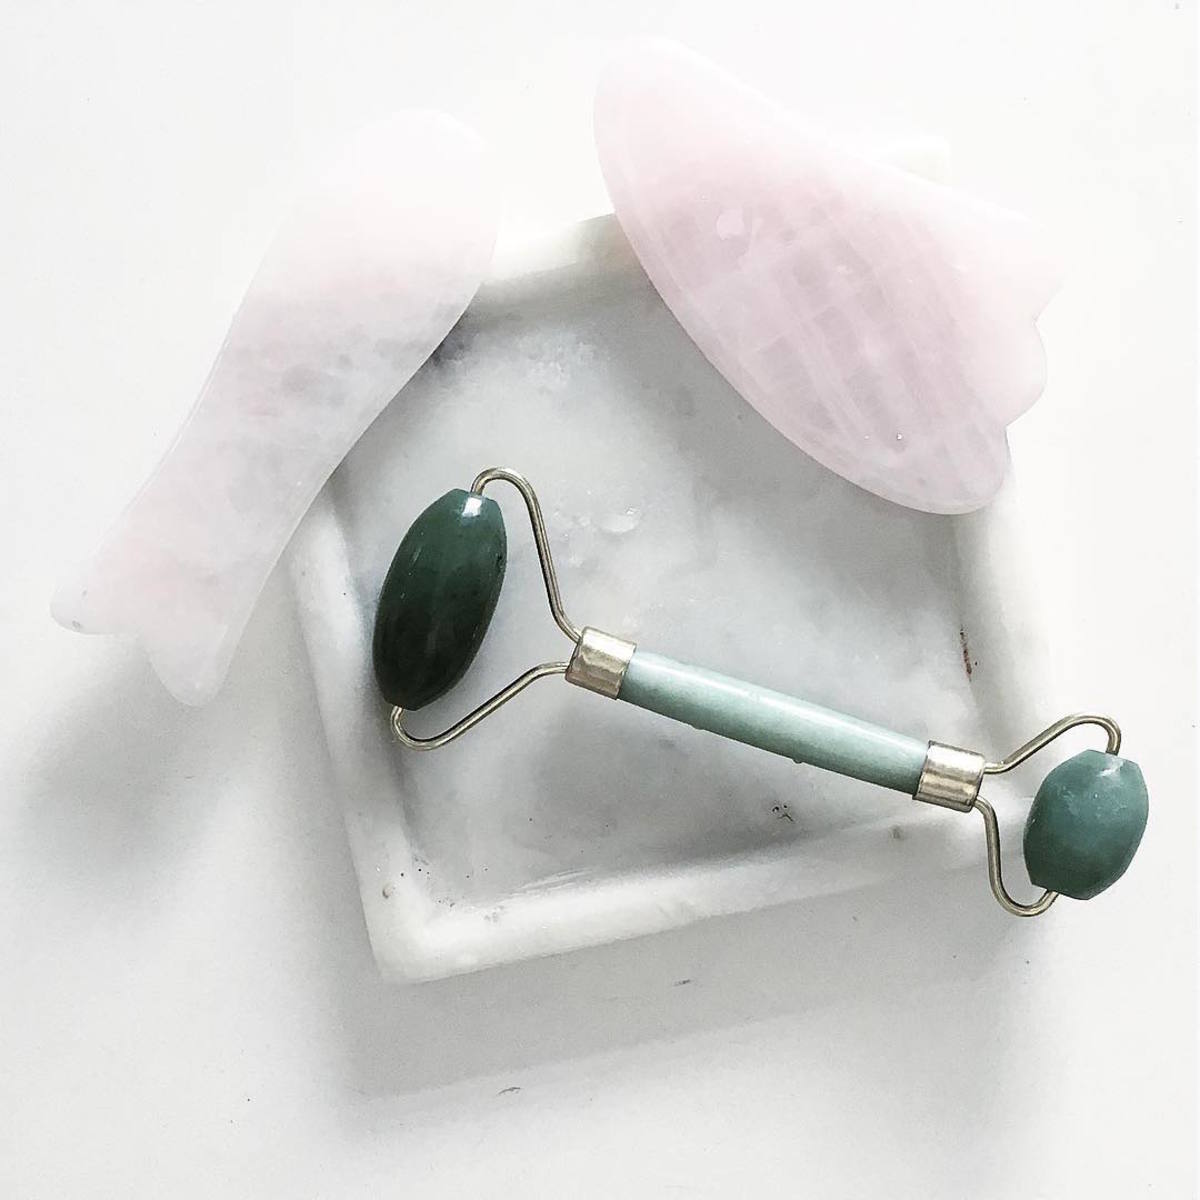 A jade roller chilling with some other chill skin-care tools. Photo: @minimalbeauty/Instagram